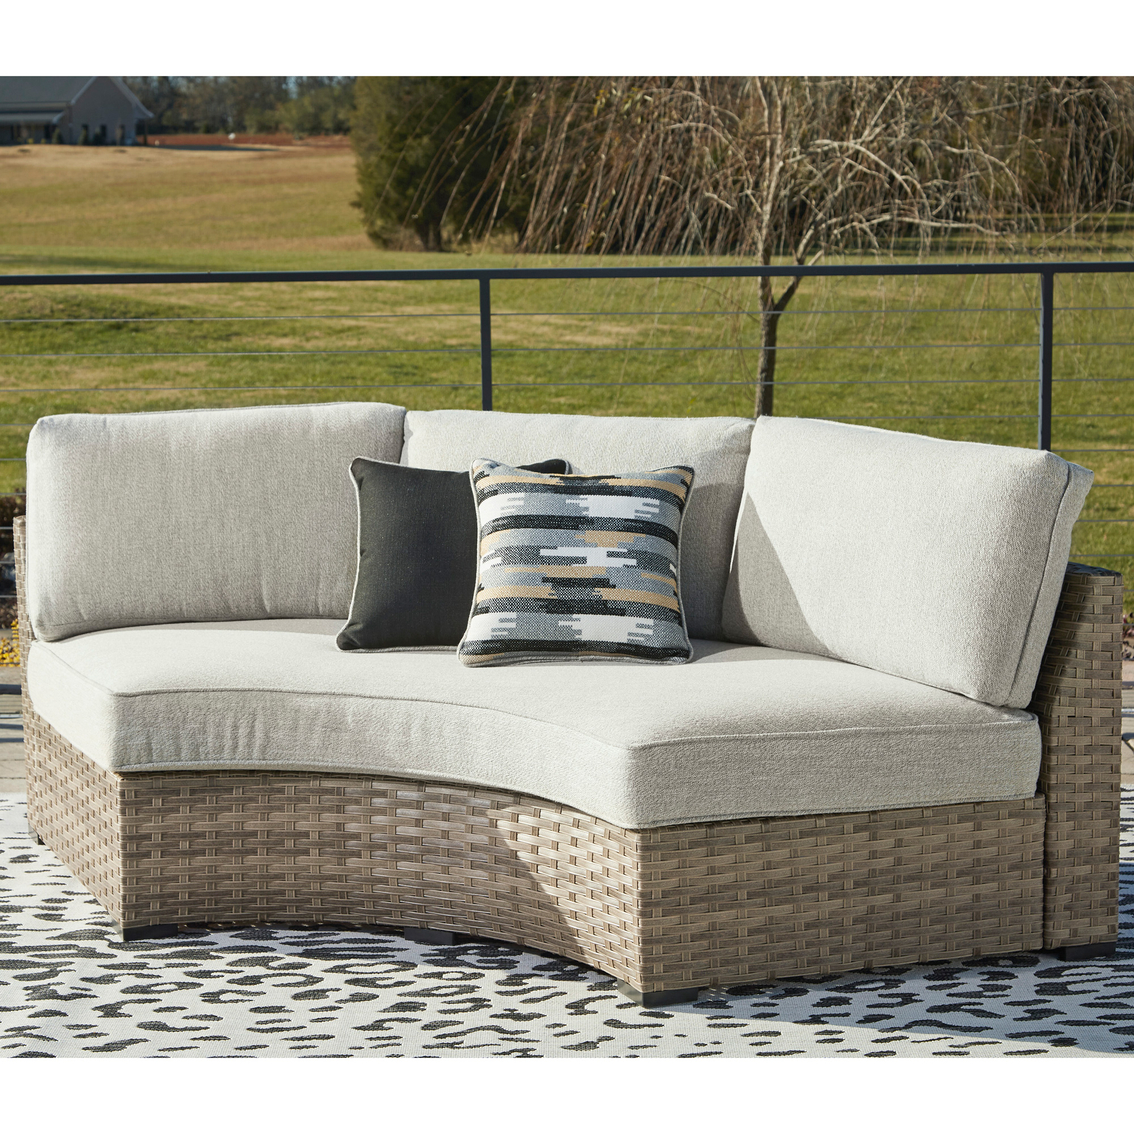 Signature Design by Ashley Calworth Outdoor 6 pc. Set - Image 5 of 6